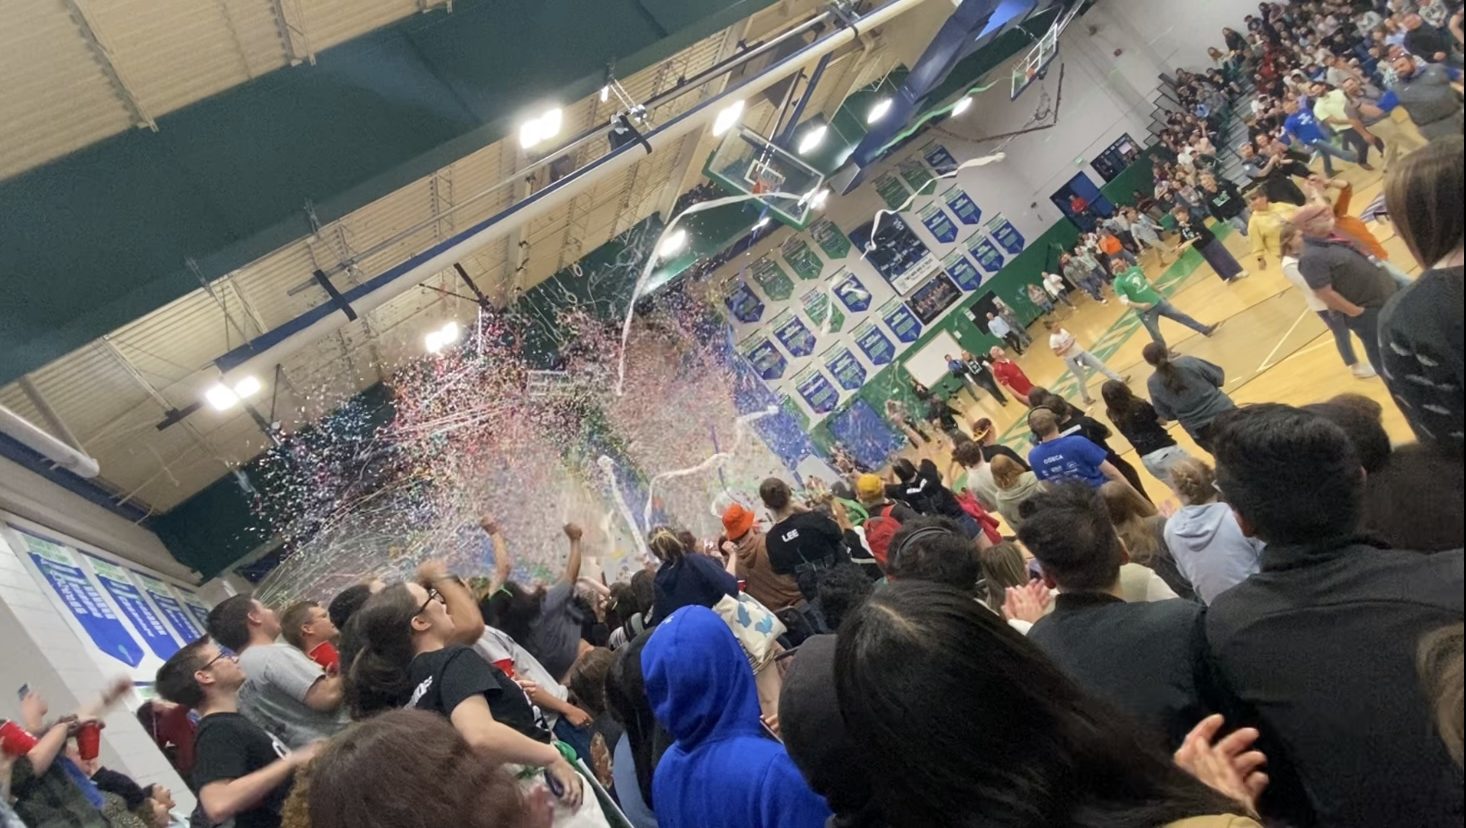 Seniors celebrating at the final assembly with silly string and streamers.